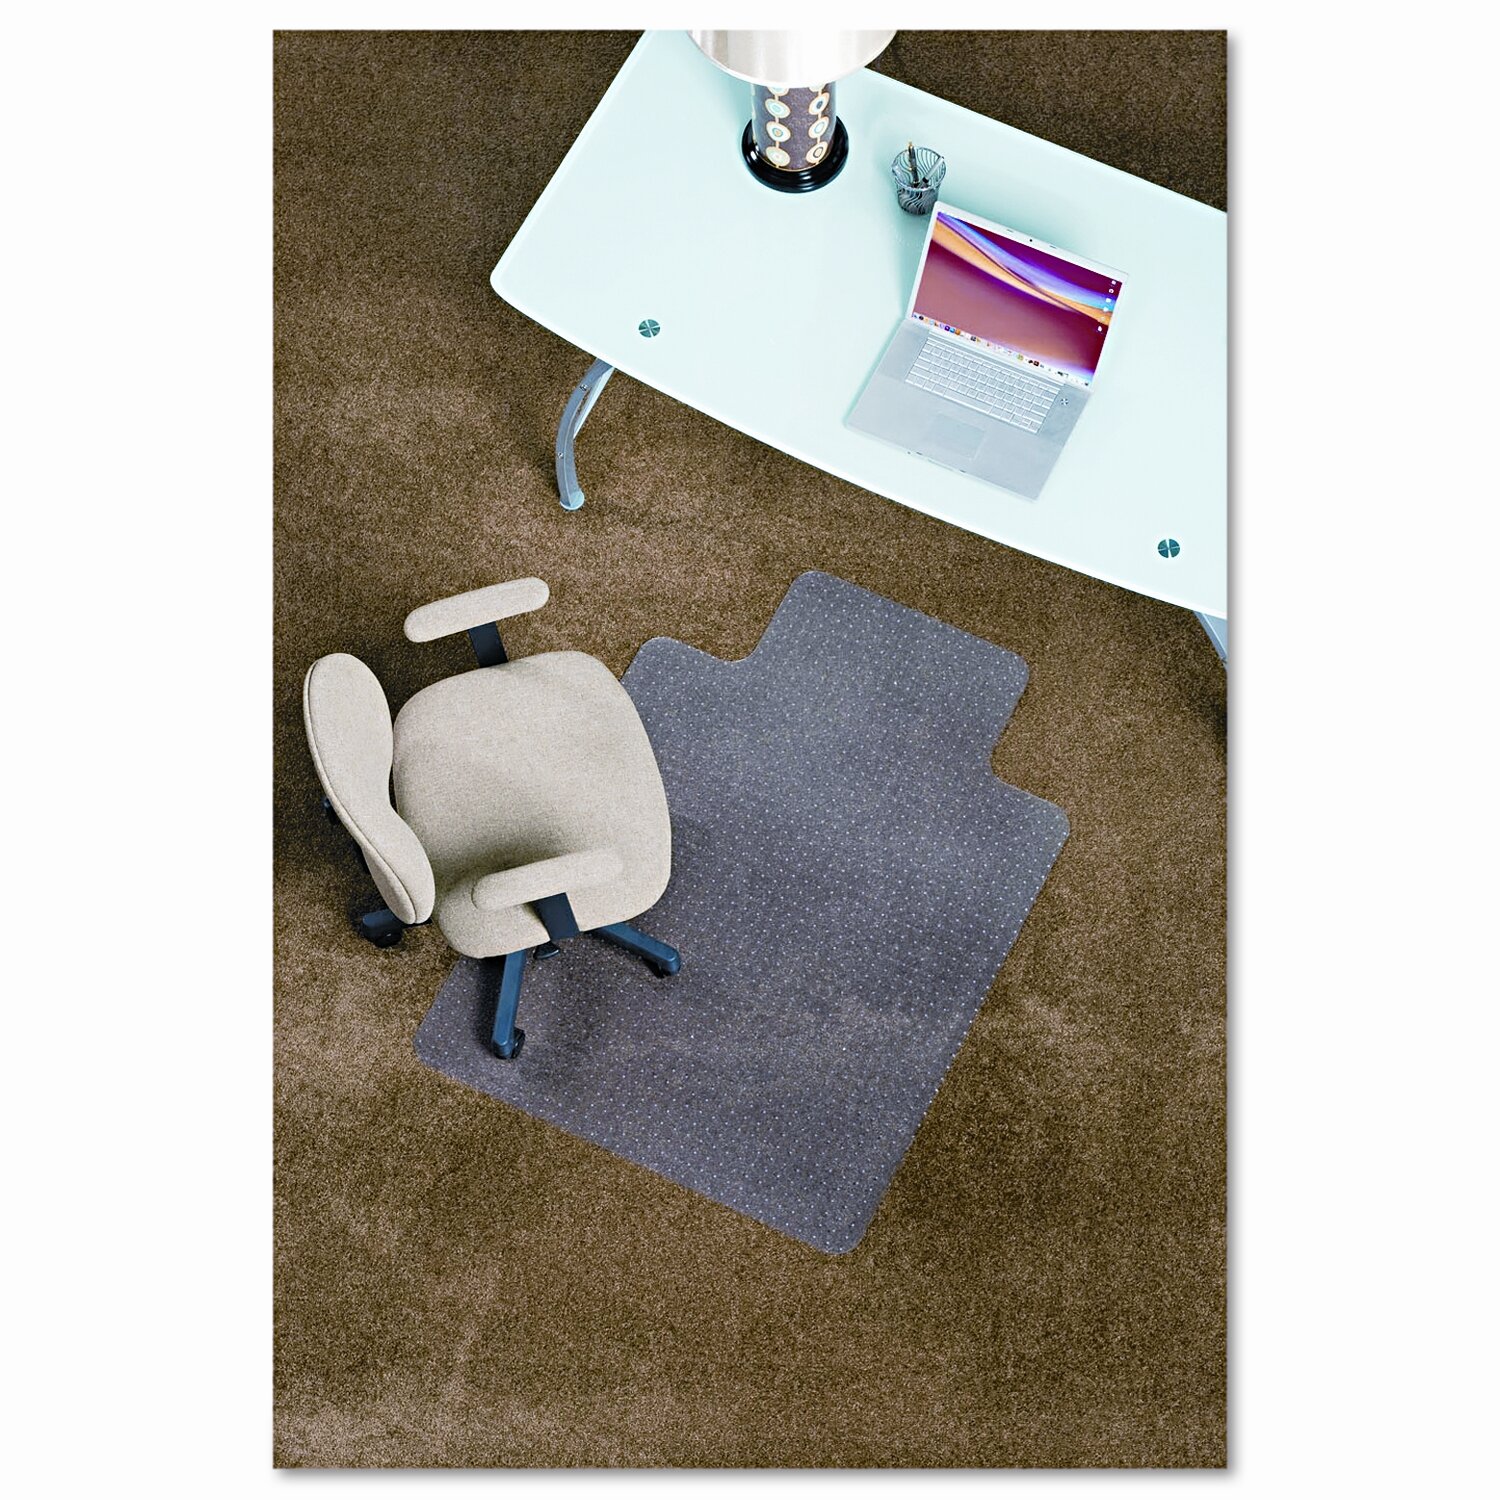 Ktaxon 36 x 48 Home Office Chair Pvc Floor Mat with Lip for